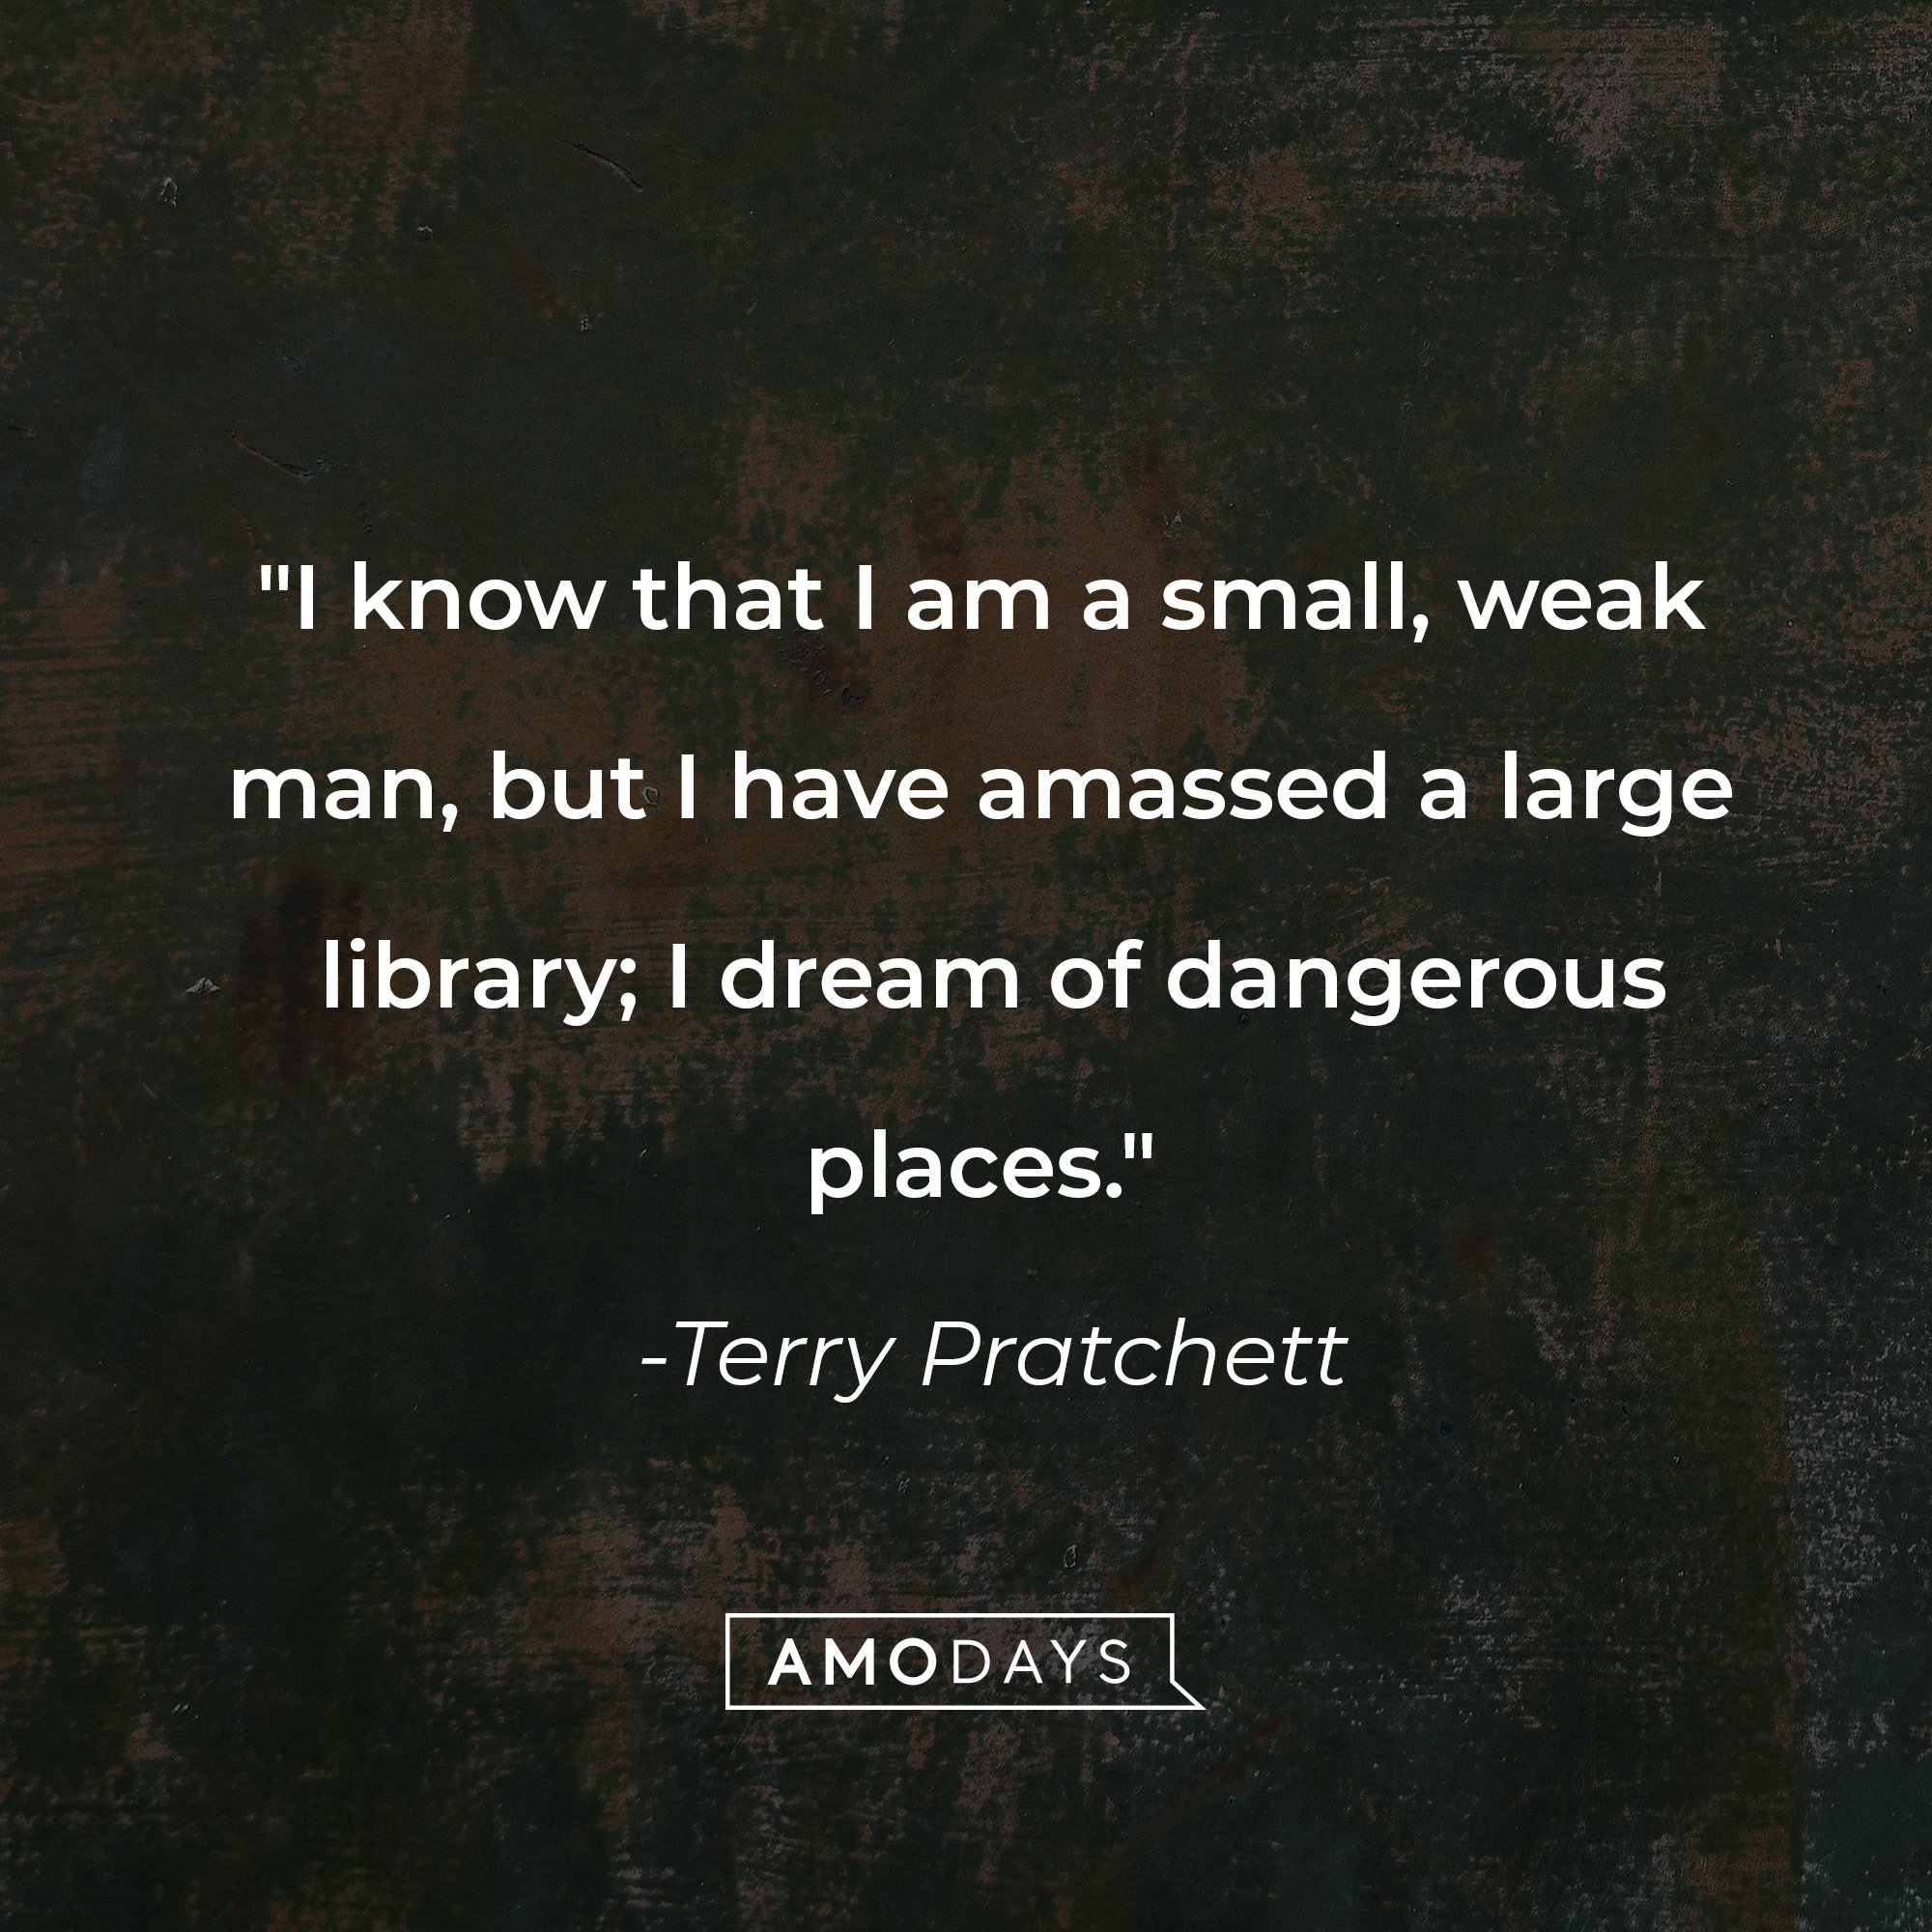 Terry Pratchett's quote: "I know that I am a small, weak man, but I have amassed a large library; I dream of dangerous places." | Image: AmoDays